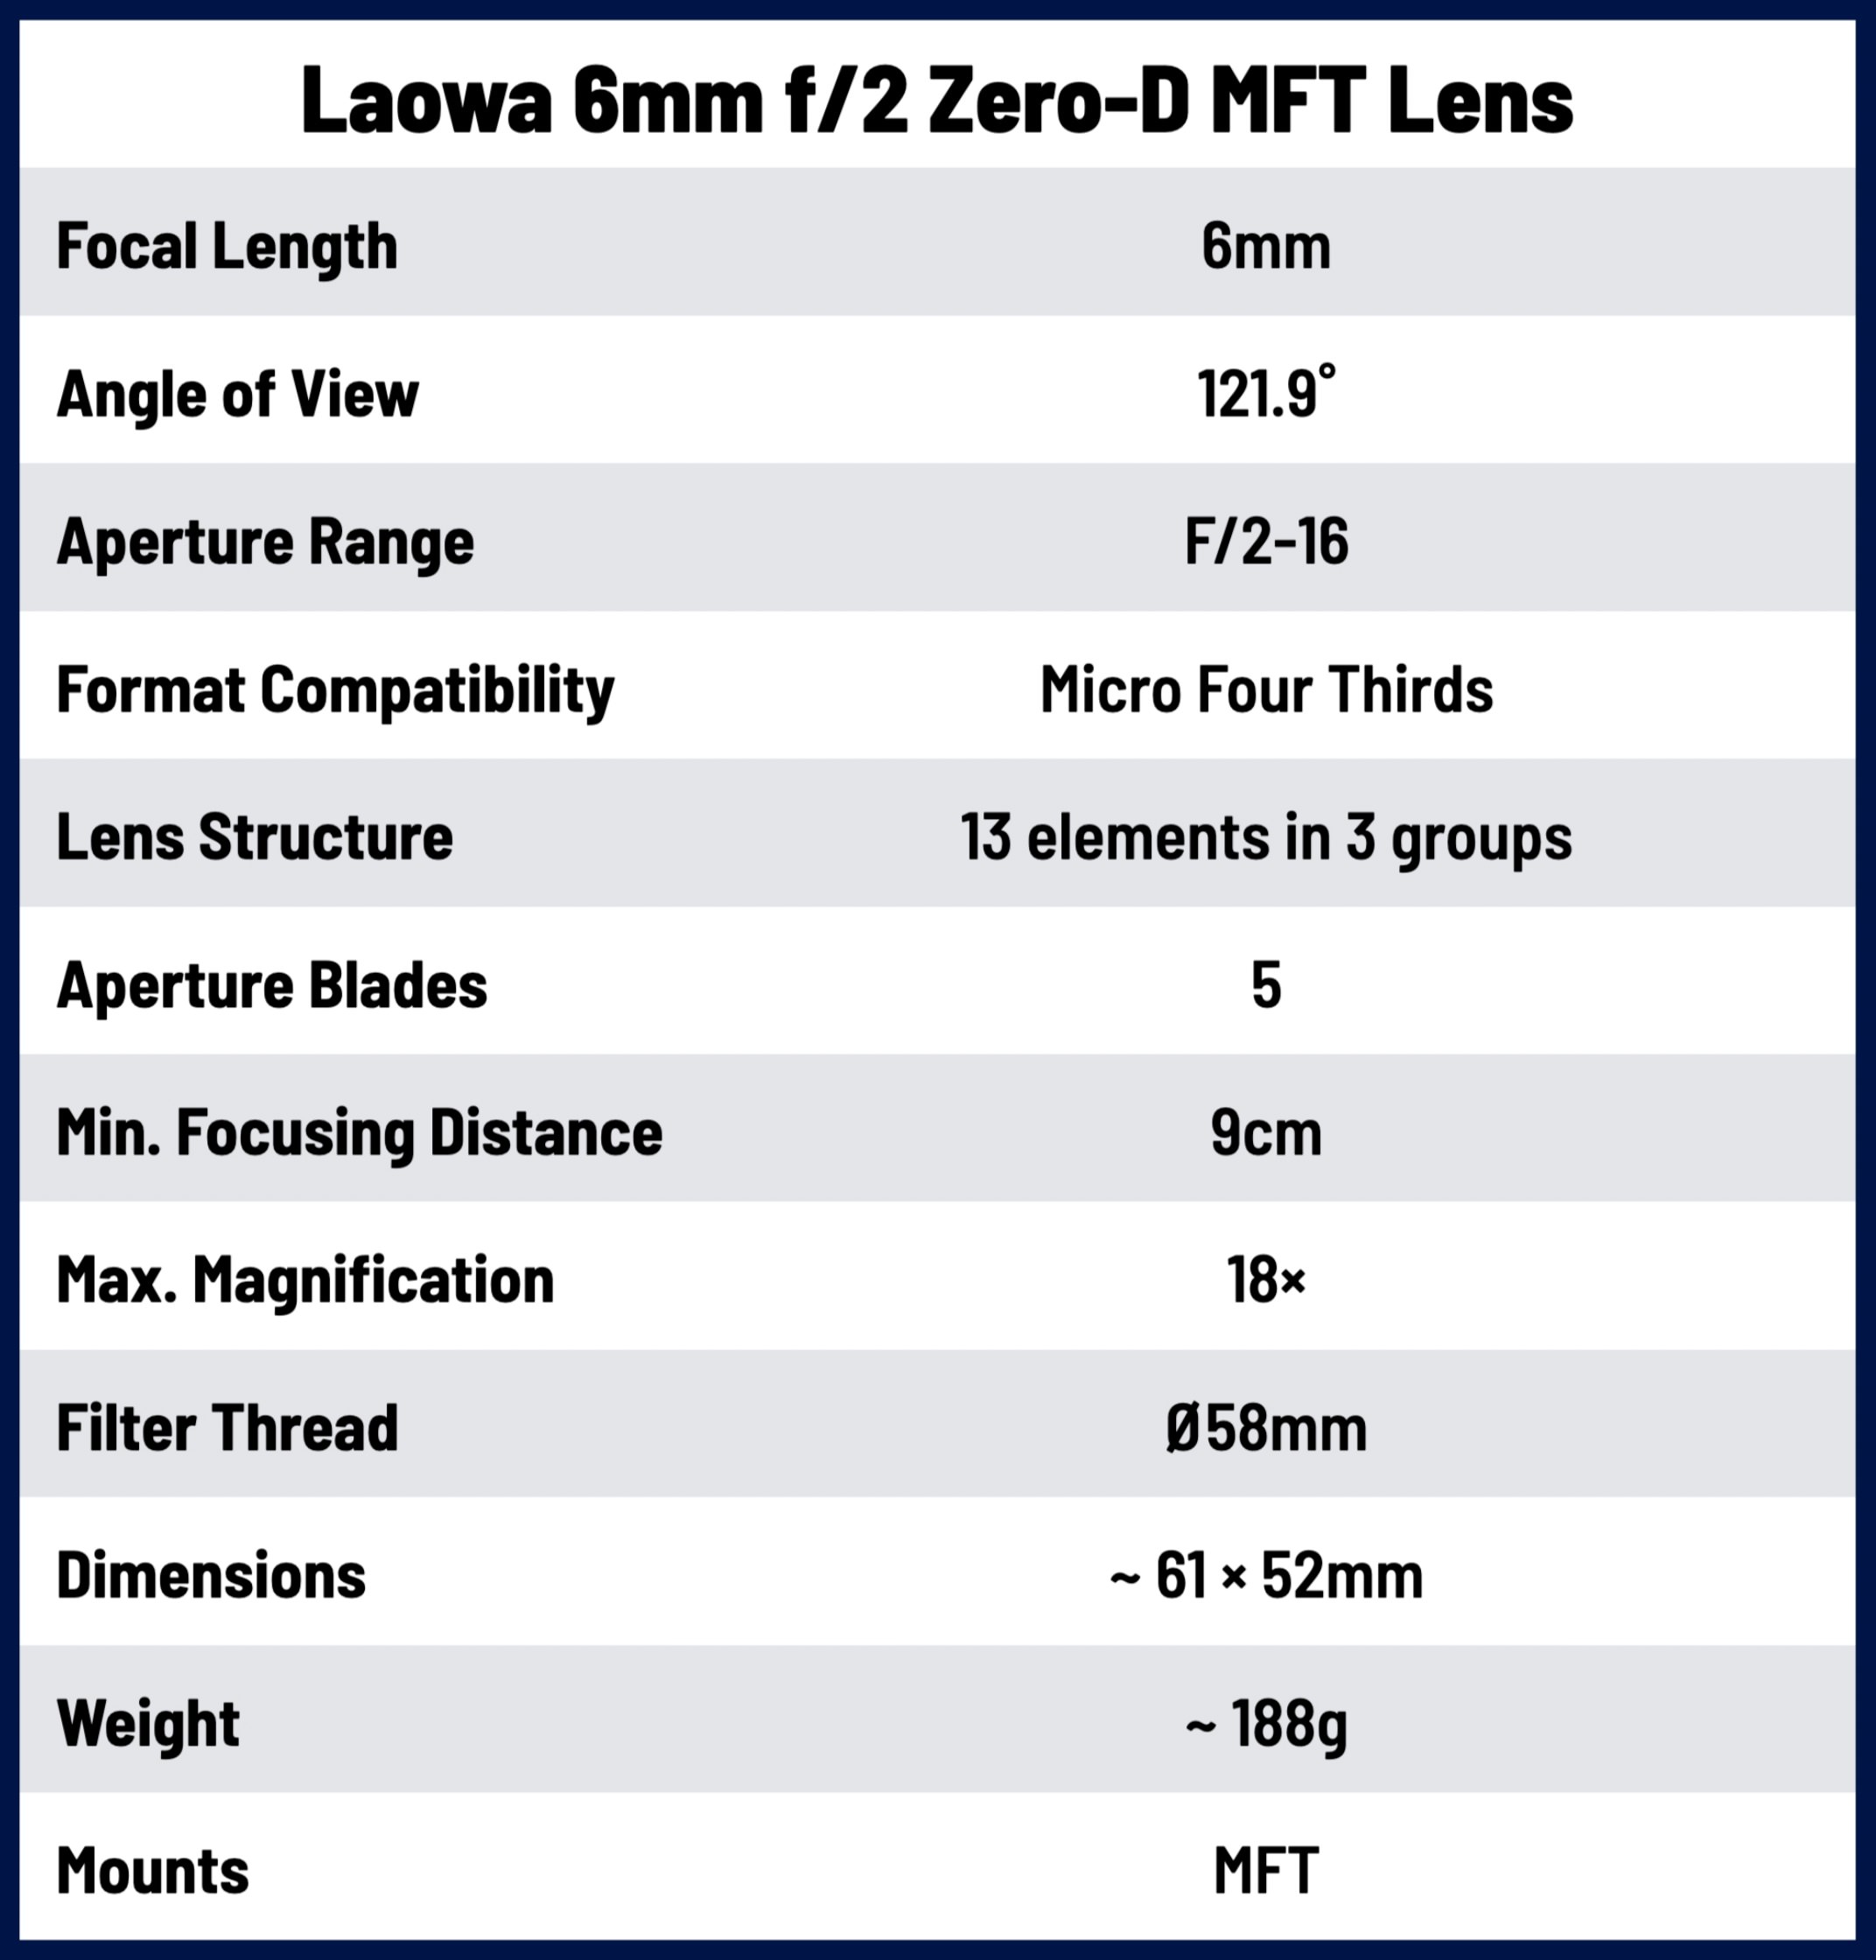 Laowa 6mm f/2 Zero-D MFT Lens Focal Length Angle of View Aperture Range Format Compatibility Lens Structure Aperture Blades Min. Focusing Distance Max. Magnification Filter Thread Dimensions Weight Mounts 6mm 121.9° F/2-16 Micro Four Thirds 13 elements in 3 groups 5 9cm 18x 058mm ~ 61 × 52mm ~ 188g MET